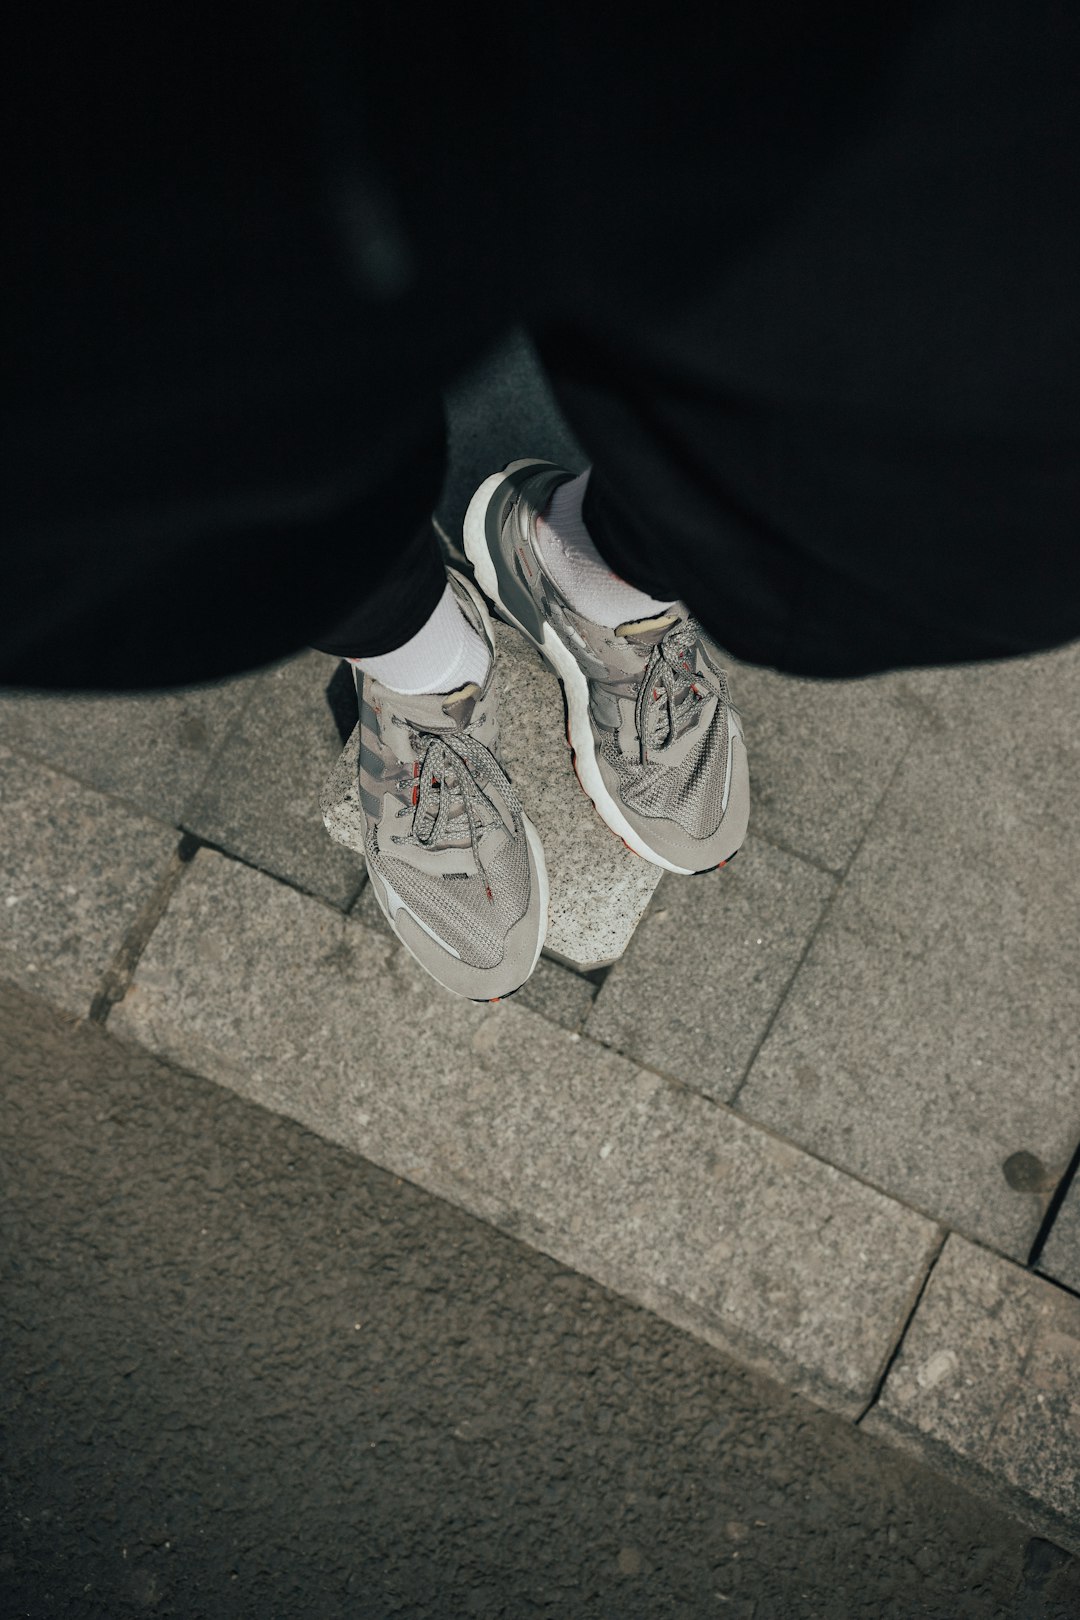 person wearing gray and white running shoes